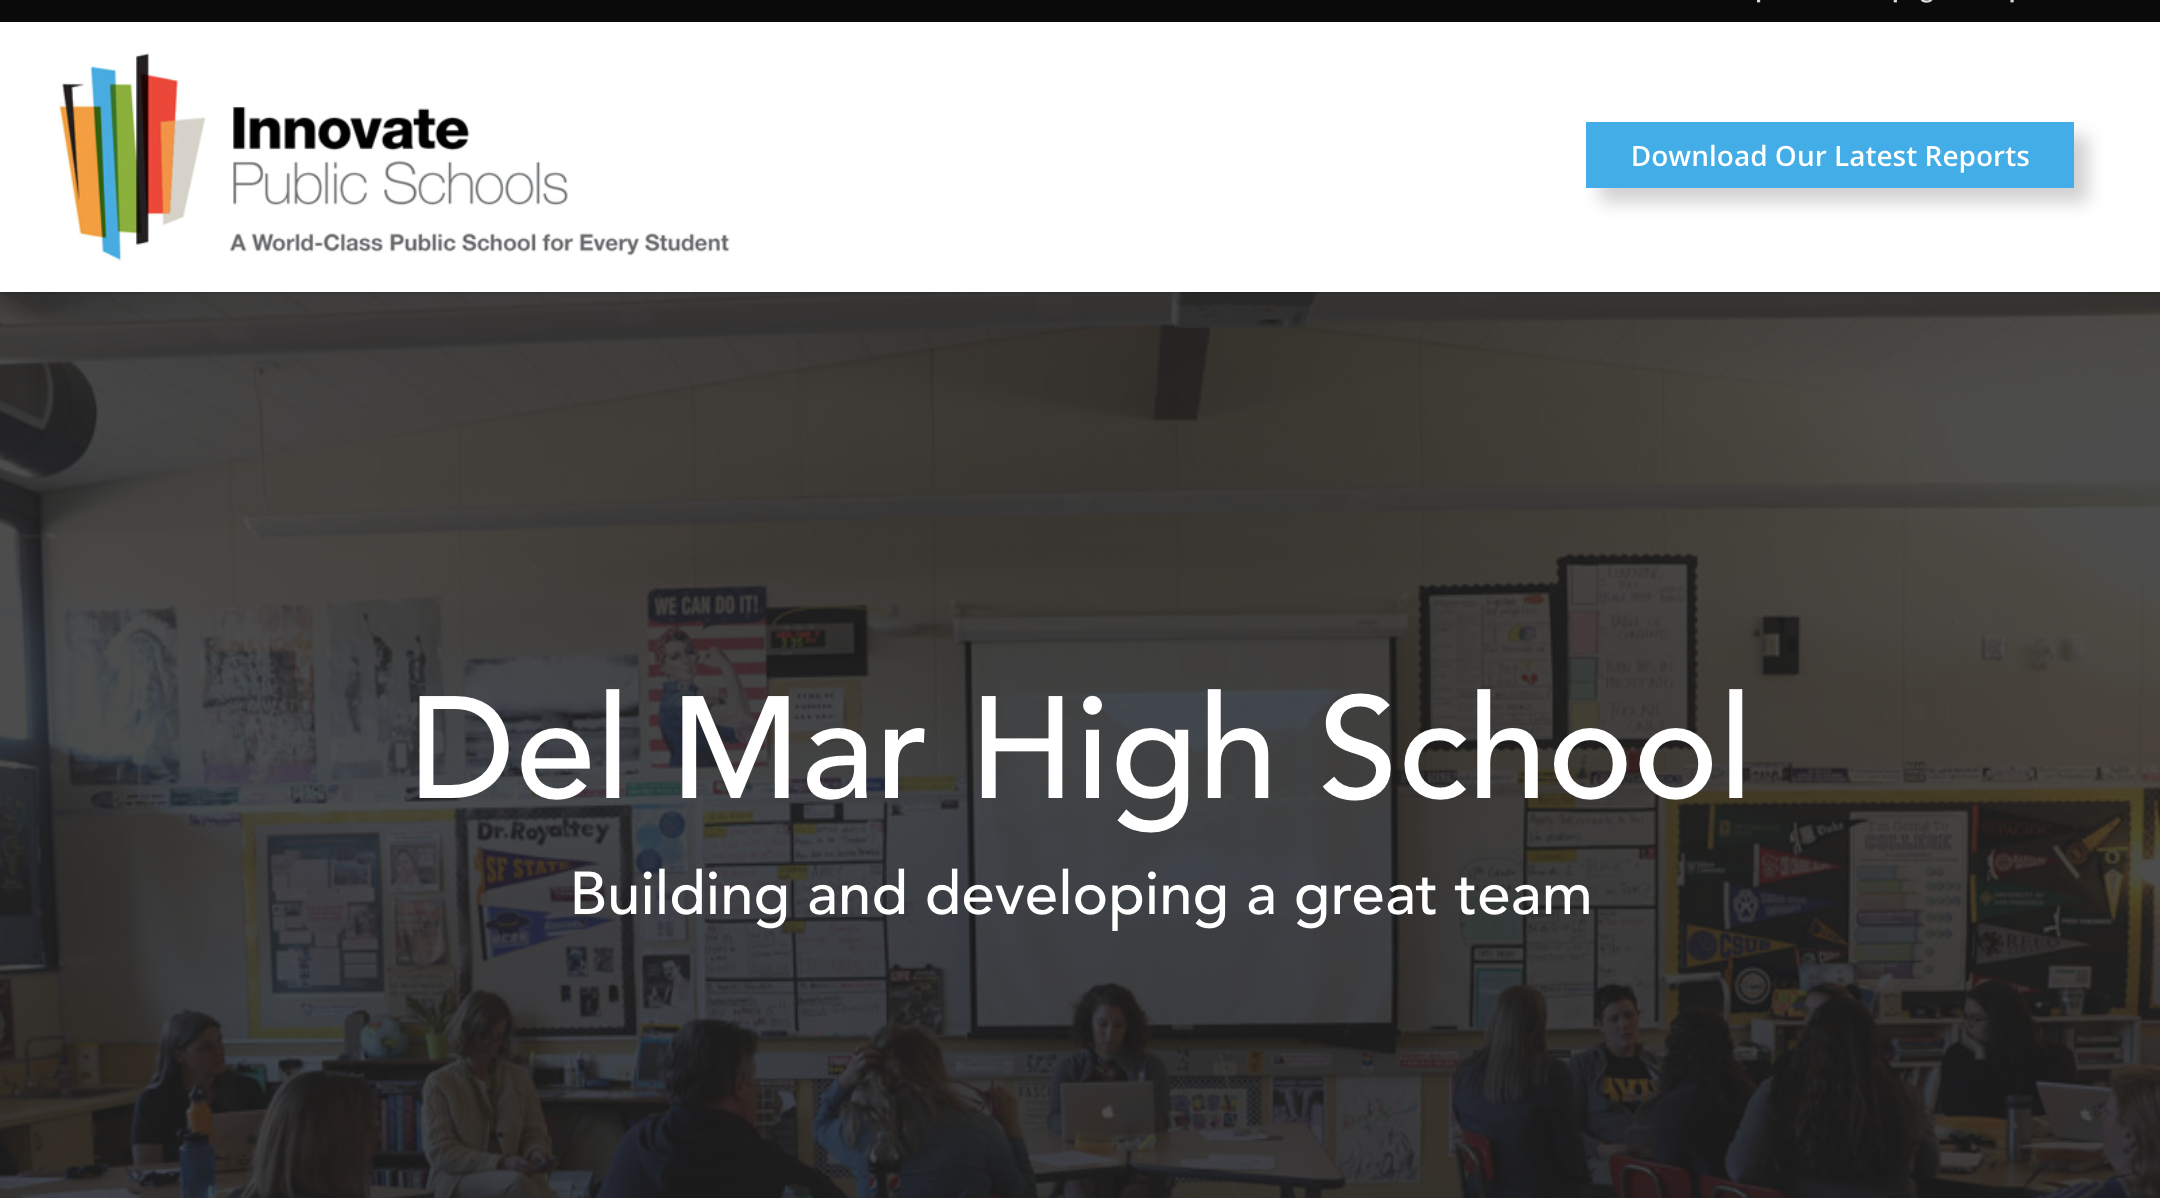 Photo of Del Mar featured as a top performing school on Innovate Public Schools website